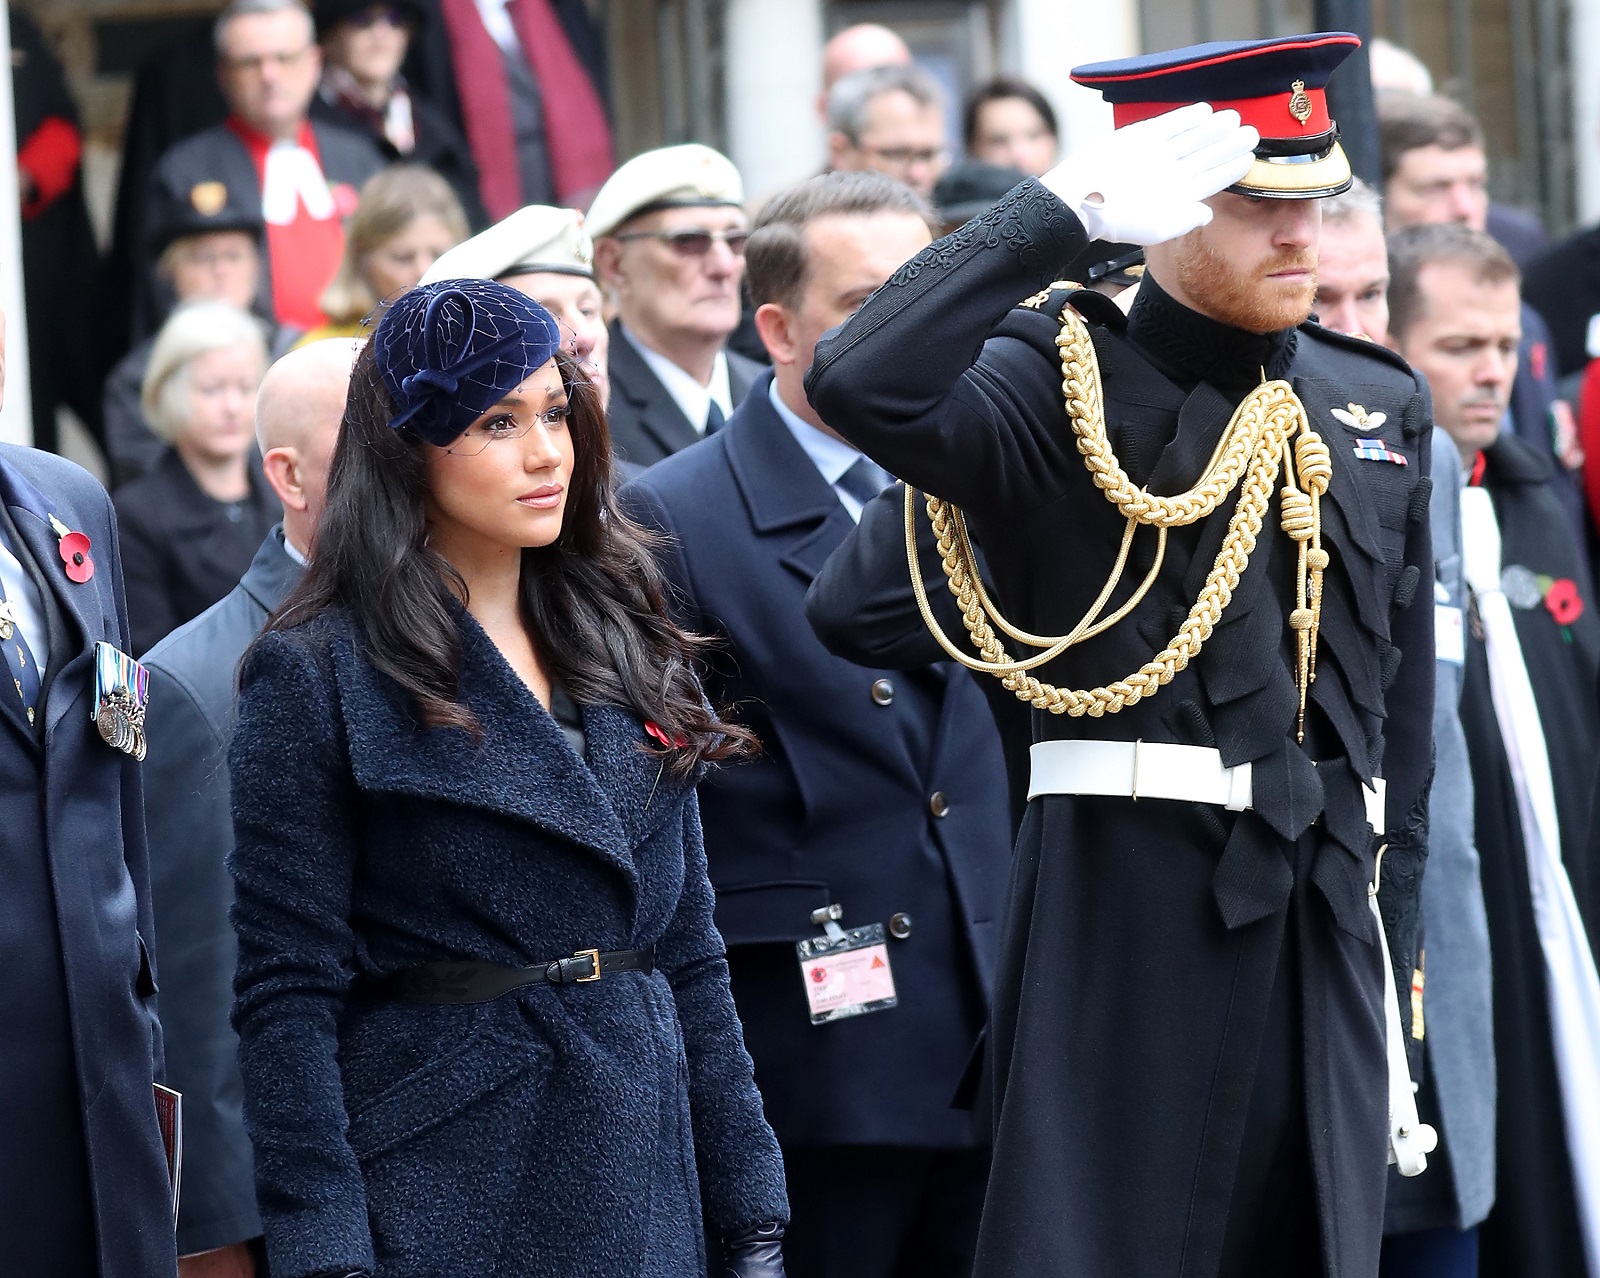 LONDON, ENGLAND - NOVEMBER 07: Prince Harry, Duke of Sussex and Meghan, Duchess of Sussex attend the 91st Field of Remembrance at Westminster Abbey on November 07, 2019 in London, England. (Photo by Chris Jackson/Getty Images)